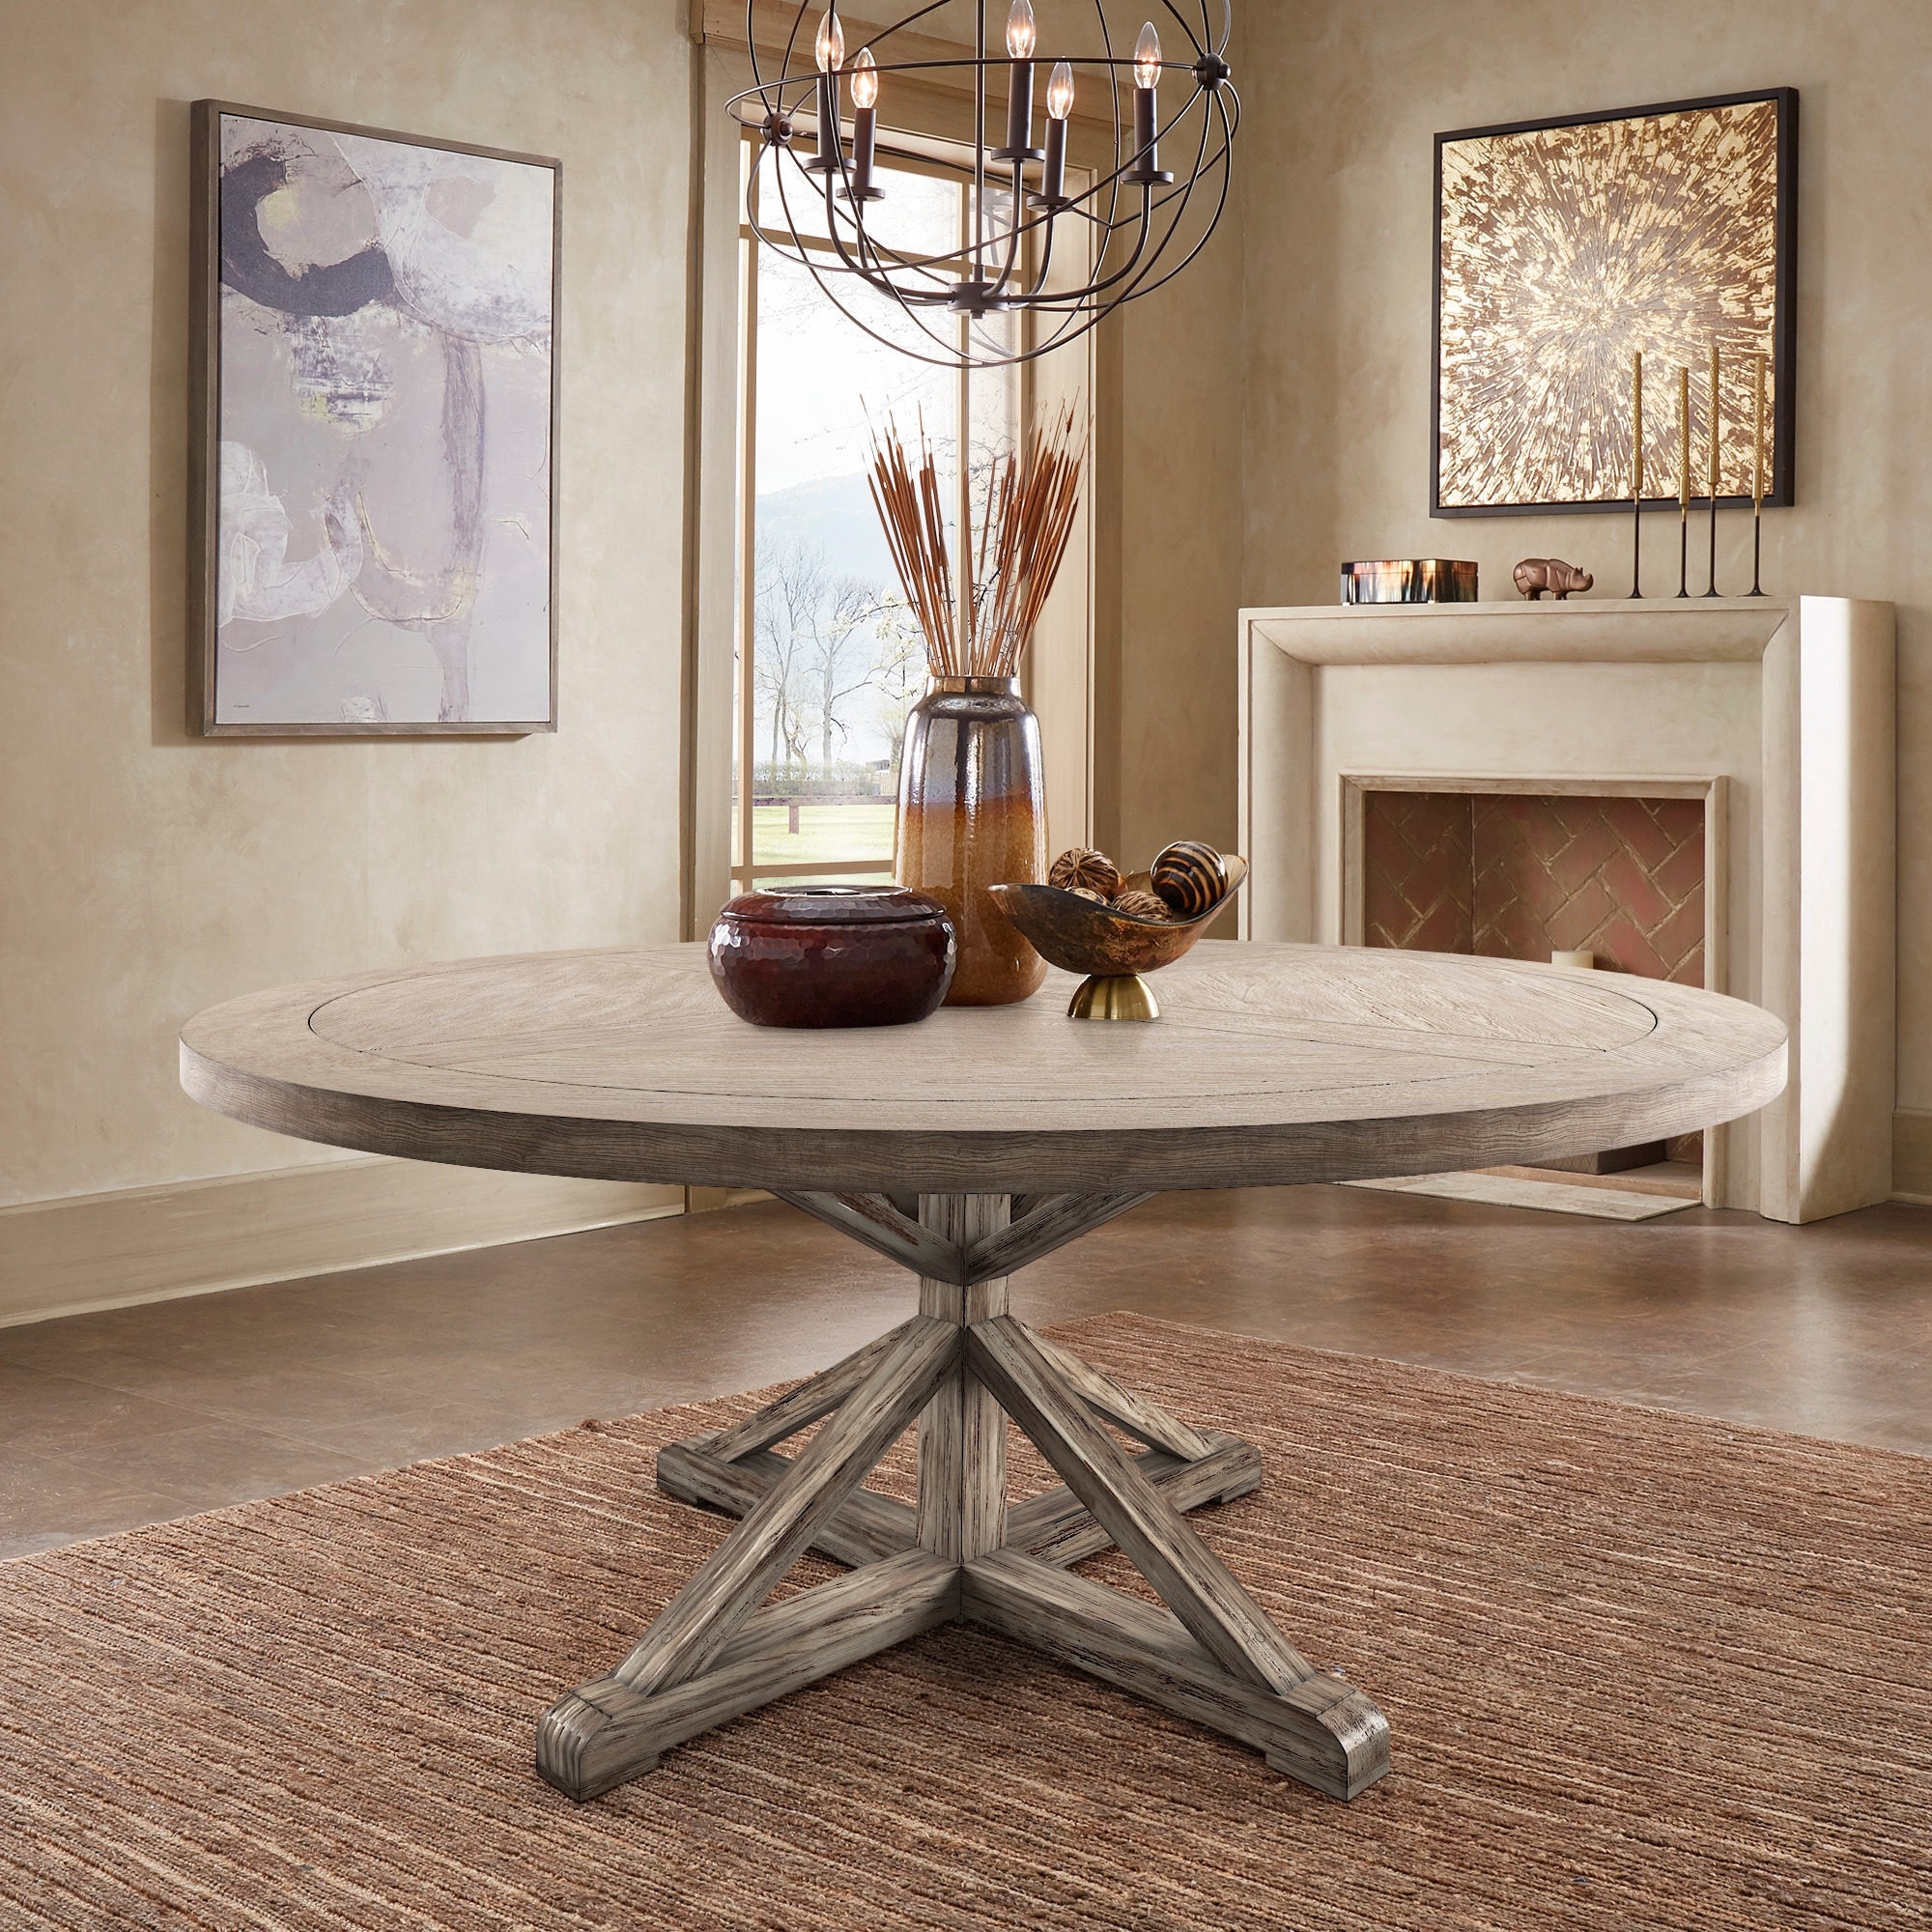 Benchwright Antique Grey Oak Round Dining Table By Inspire Q Artisan Sale